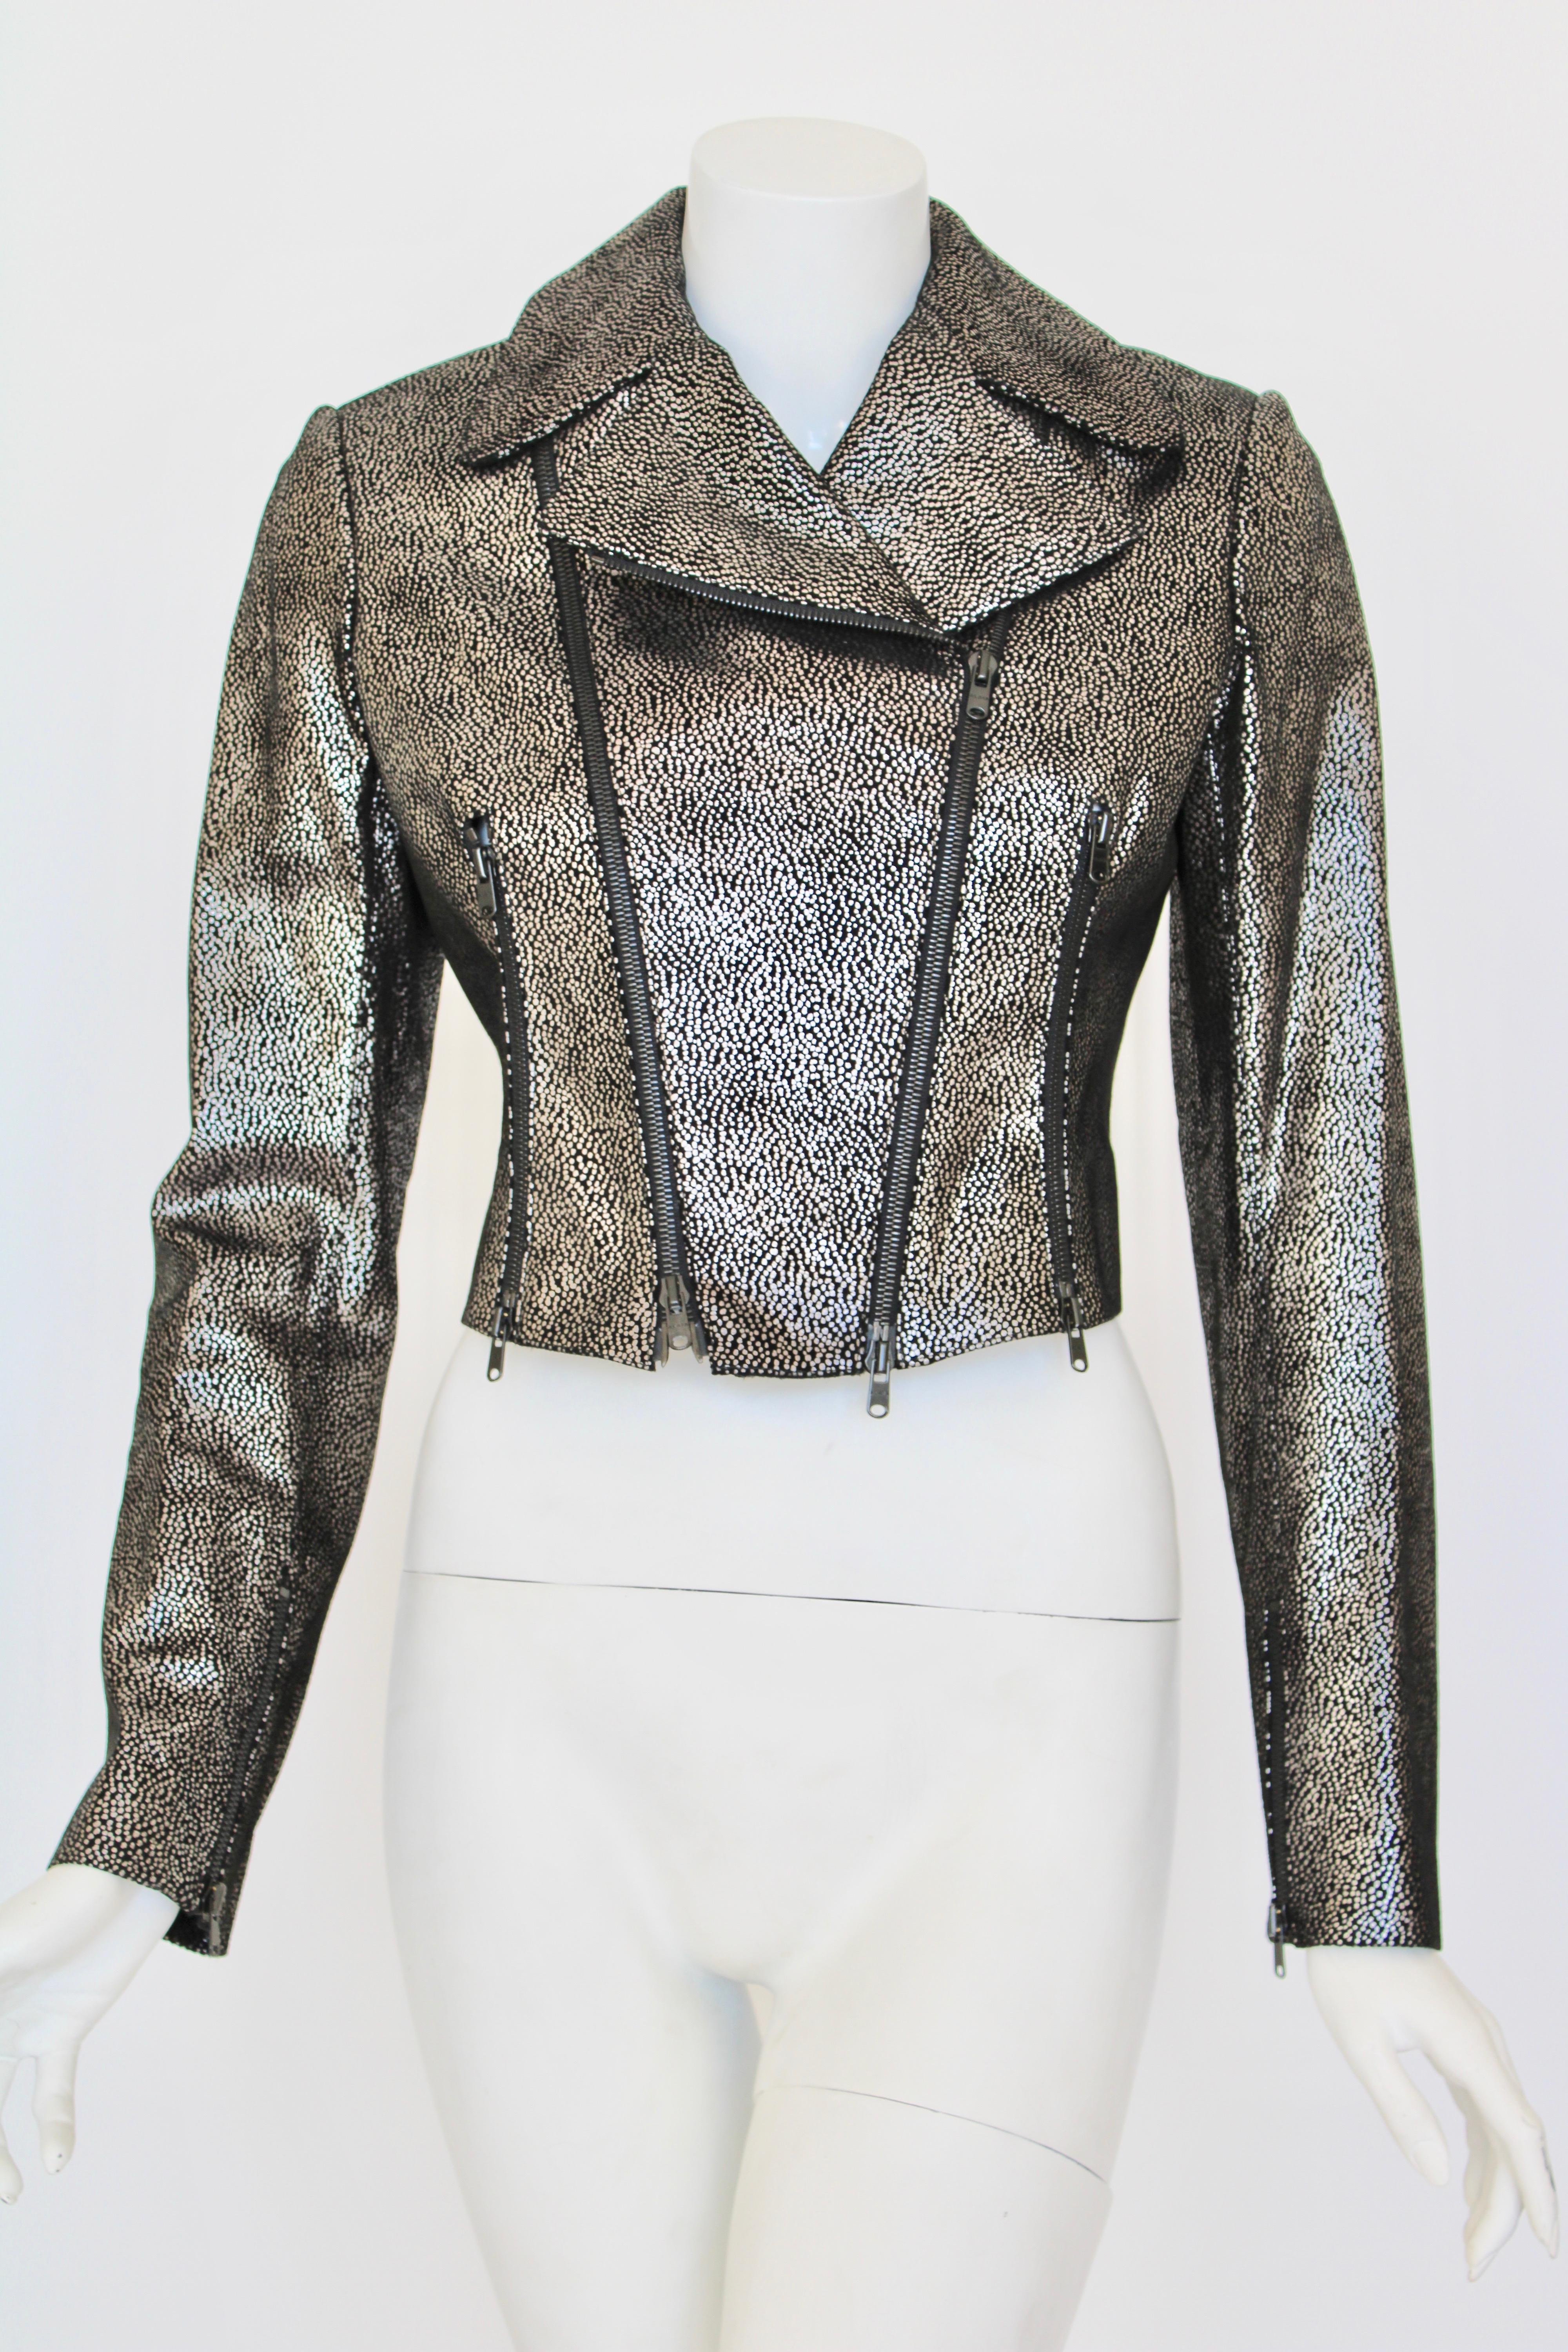 A long sleeve suede motorcycle jacket with hand painted silver dots all over, multiple zippers in the front create a wonderful shape.